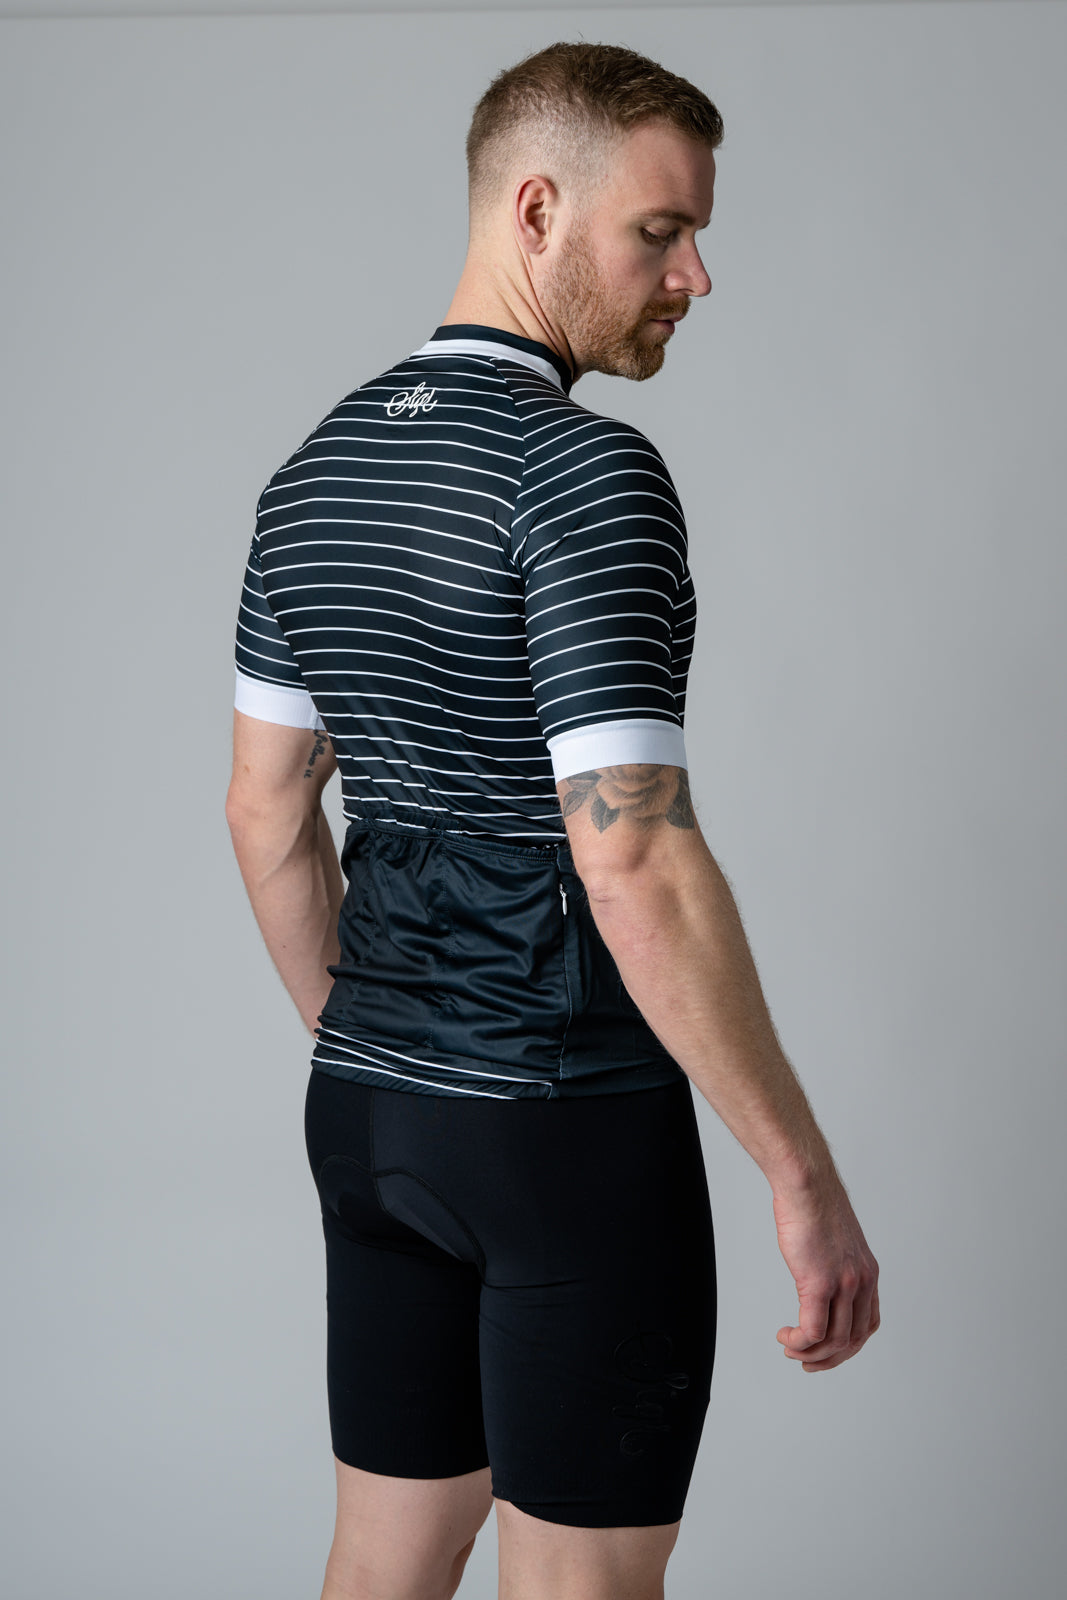 Rear view of 'Black Horizon' men's cycling jersey in black and white stripes